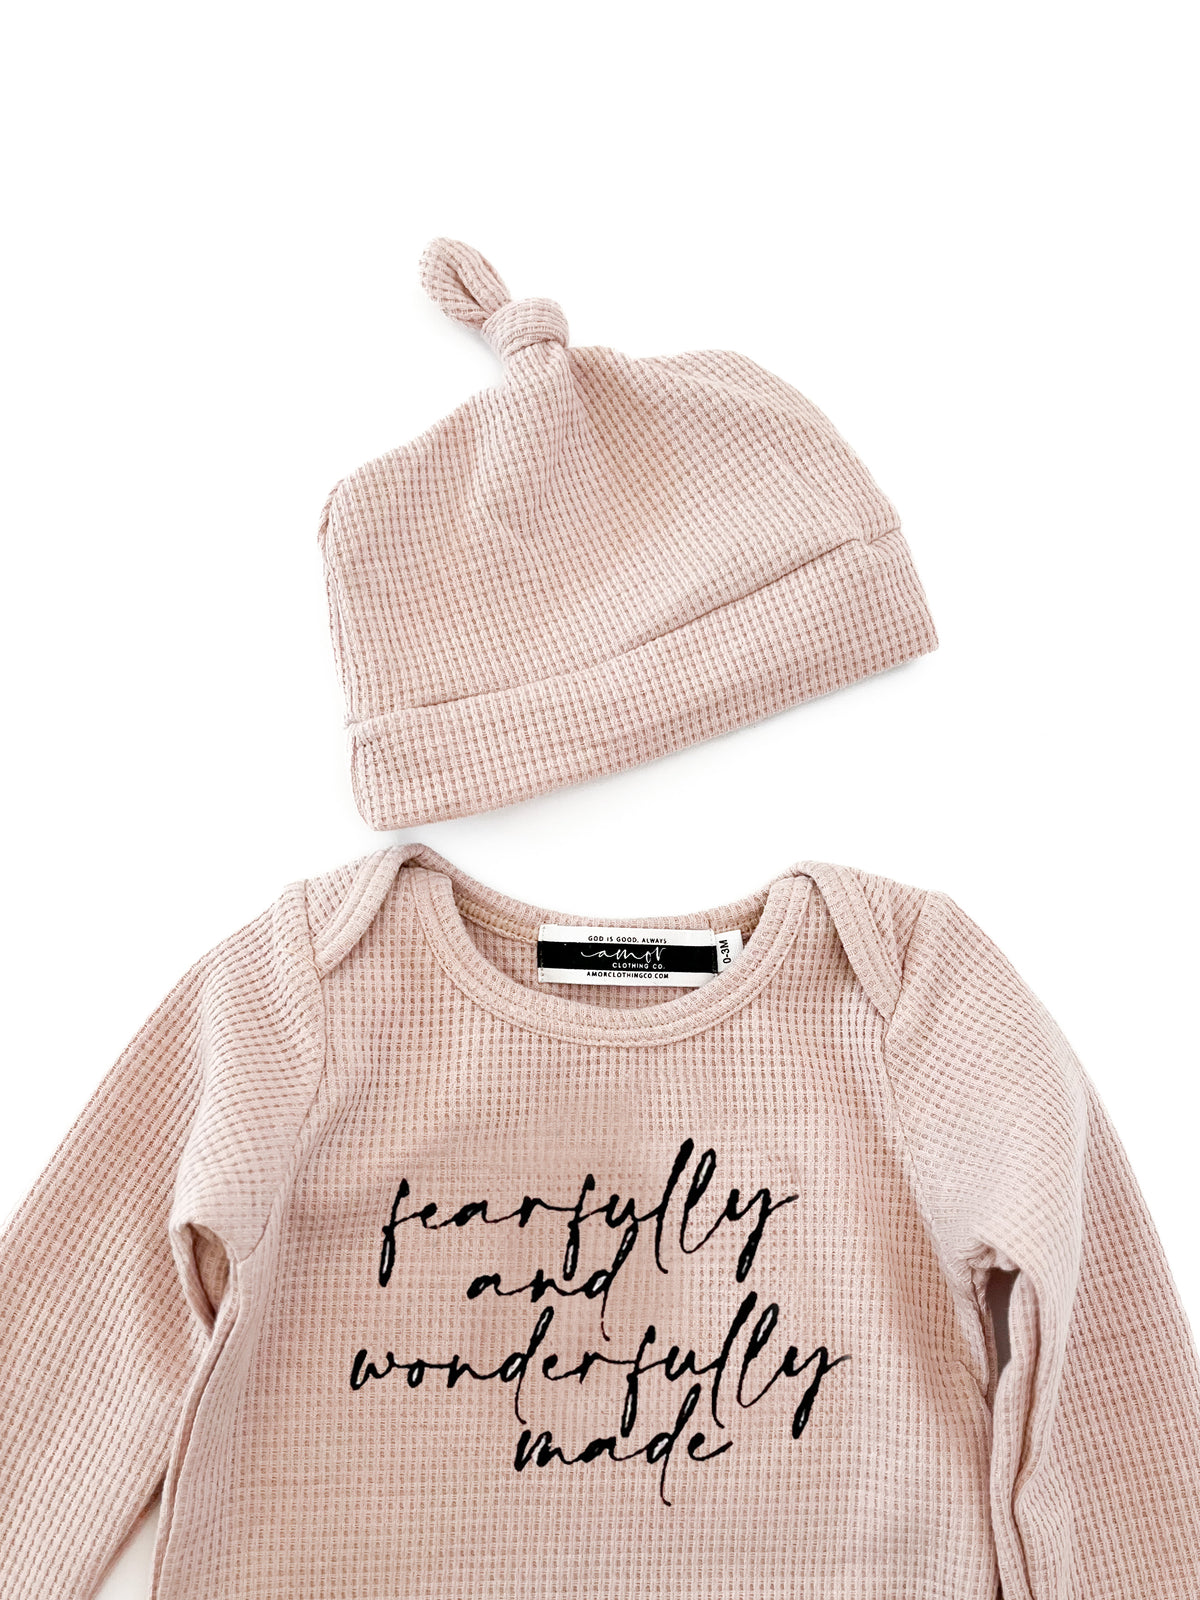 Fearfully & Wonderfully Made Knotted Baby Sleeper & Matching Beanie